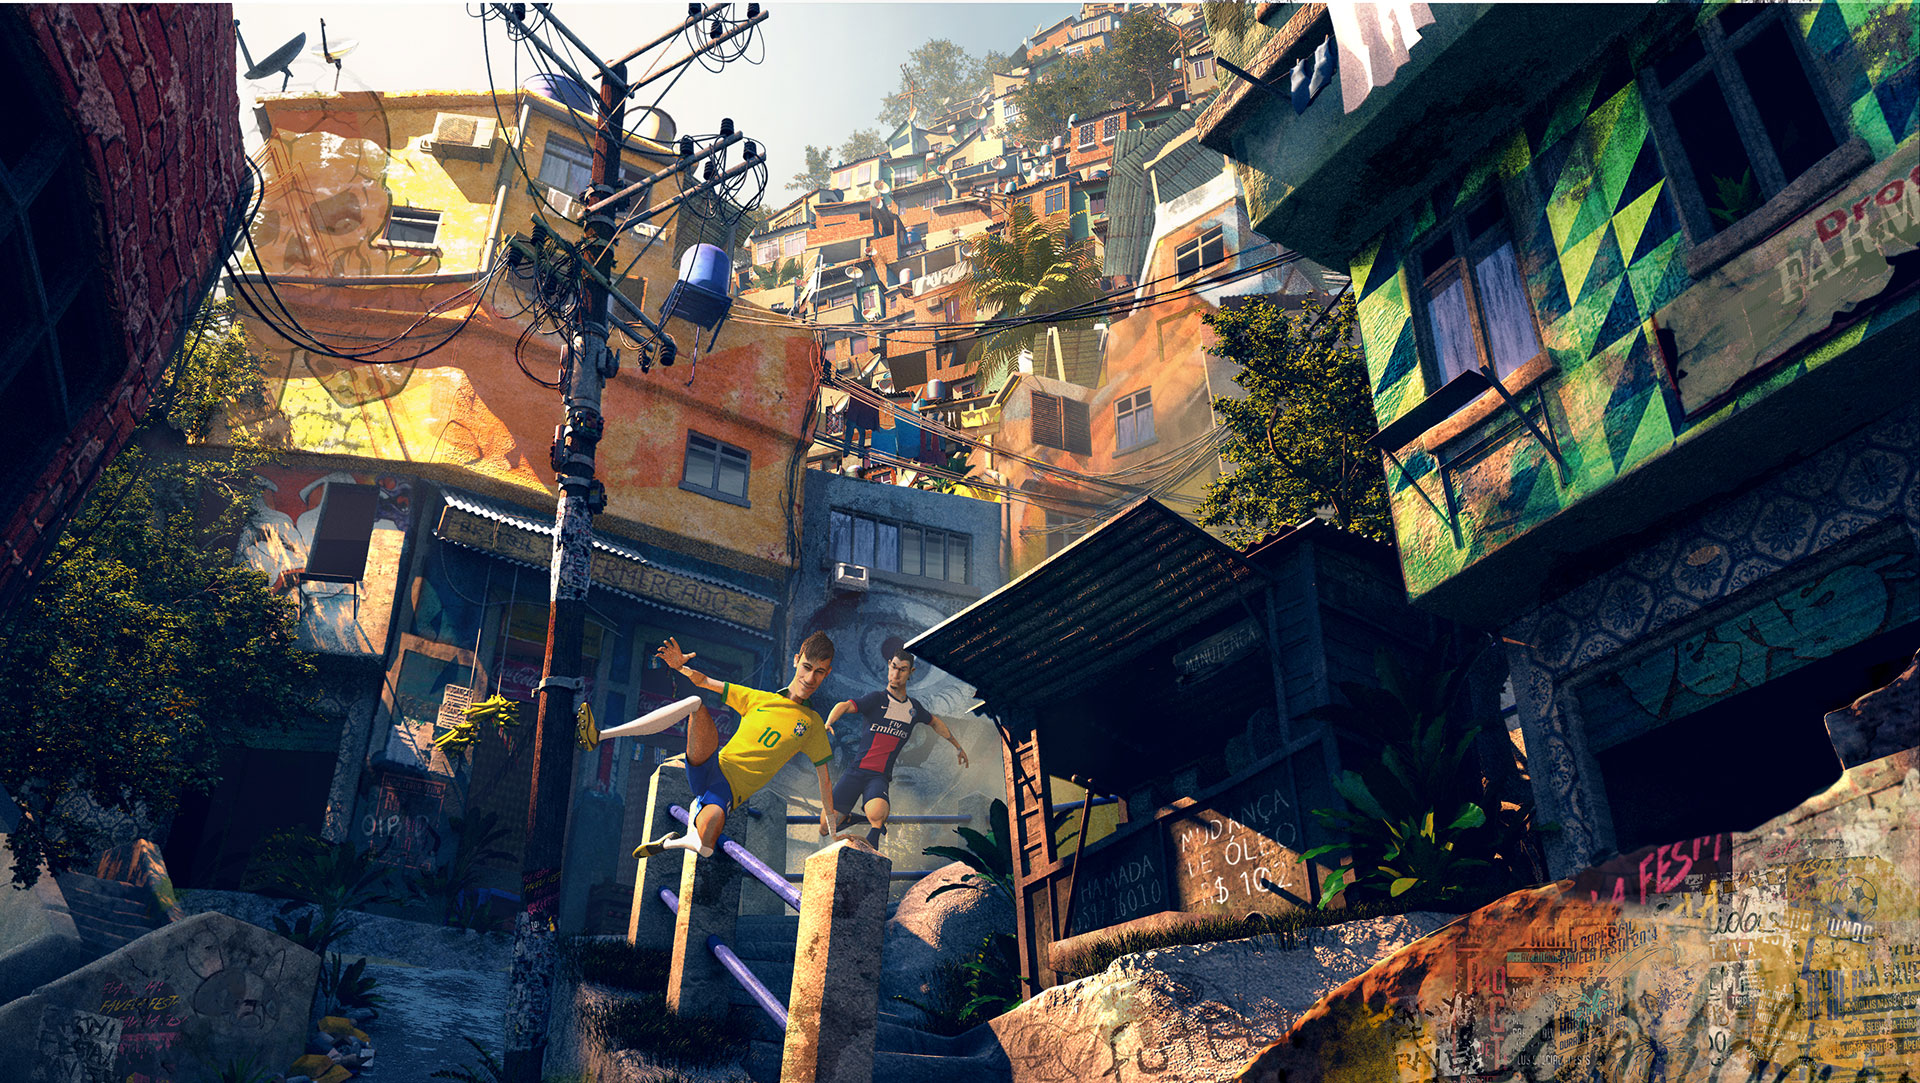 A 3D render of a chaotic and crowded favela